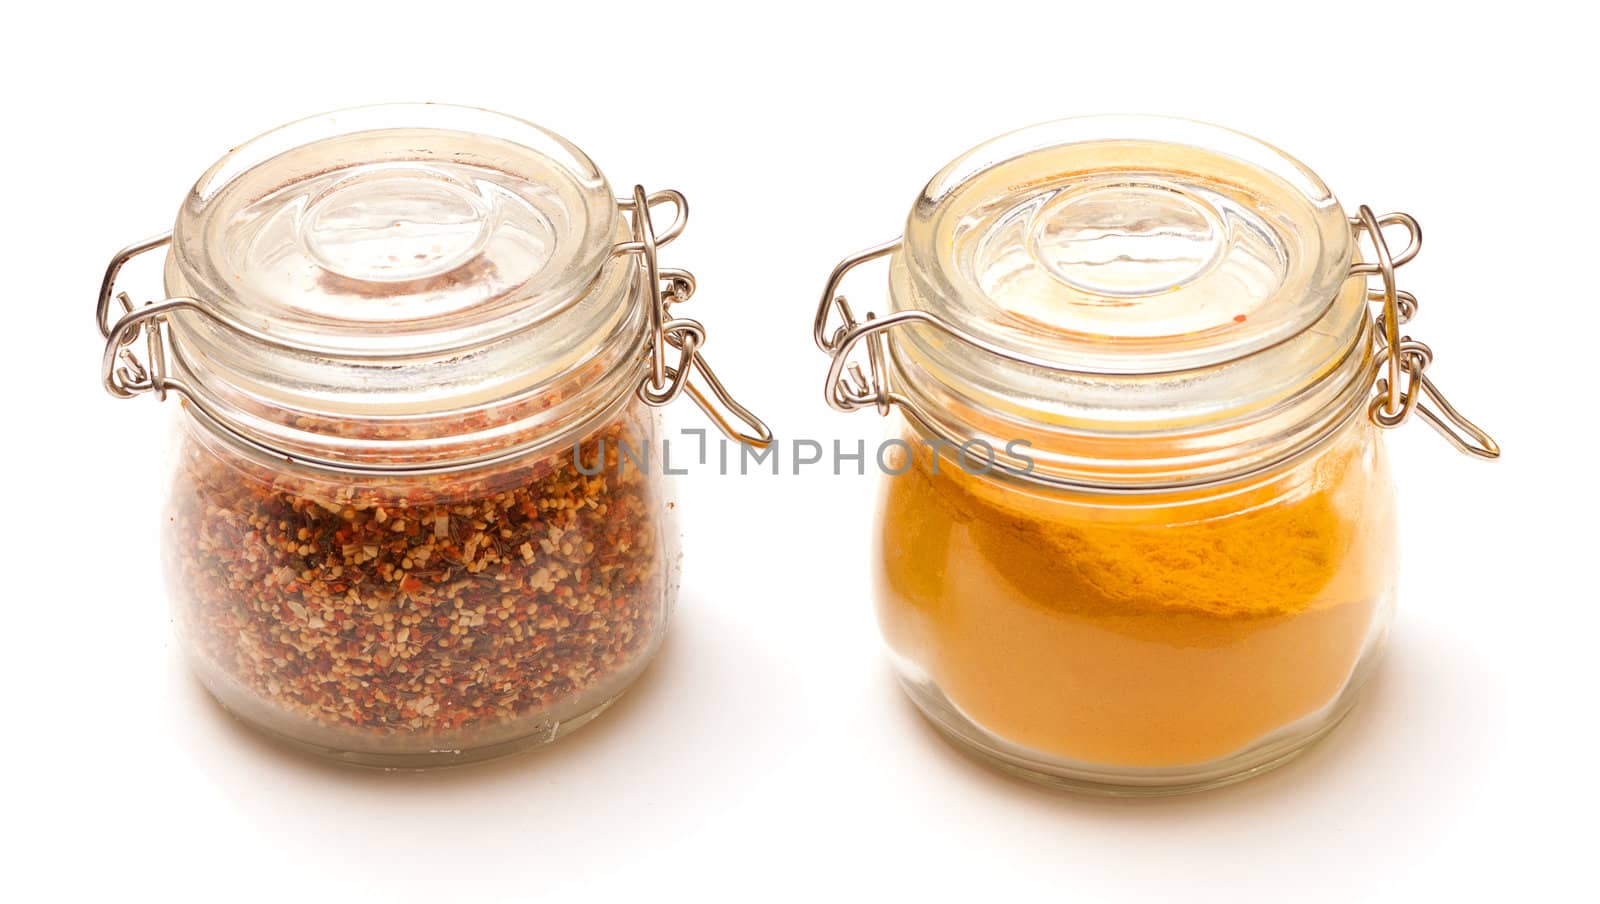 photo of multi-colored spices on white background